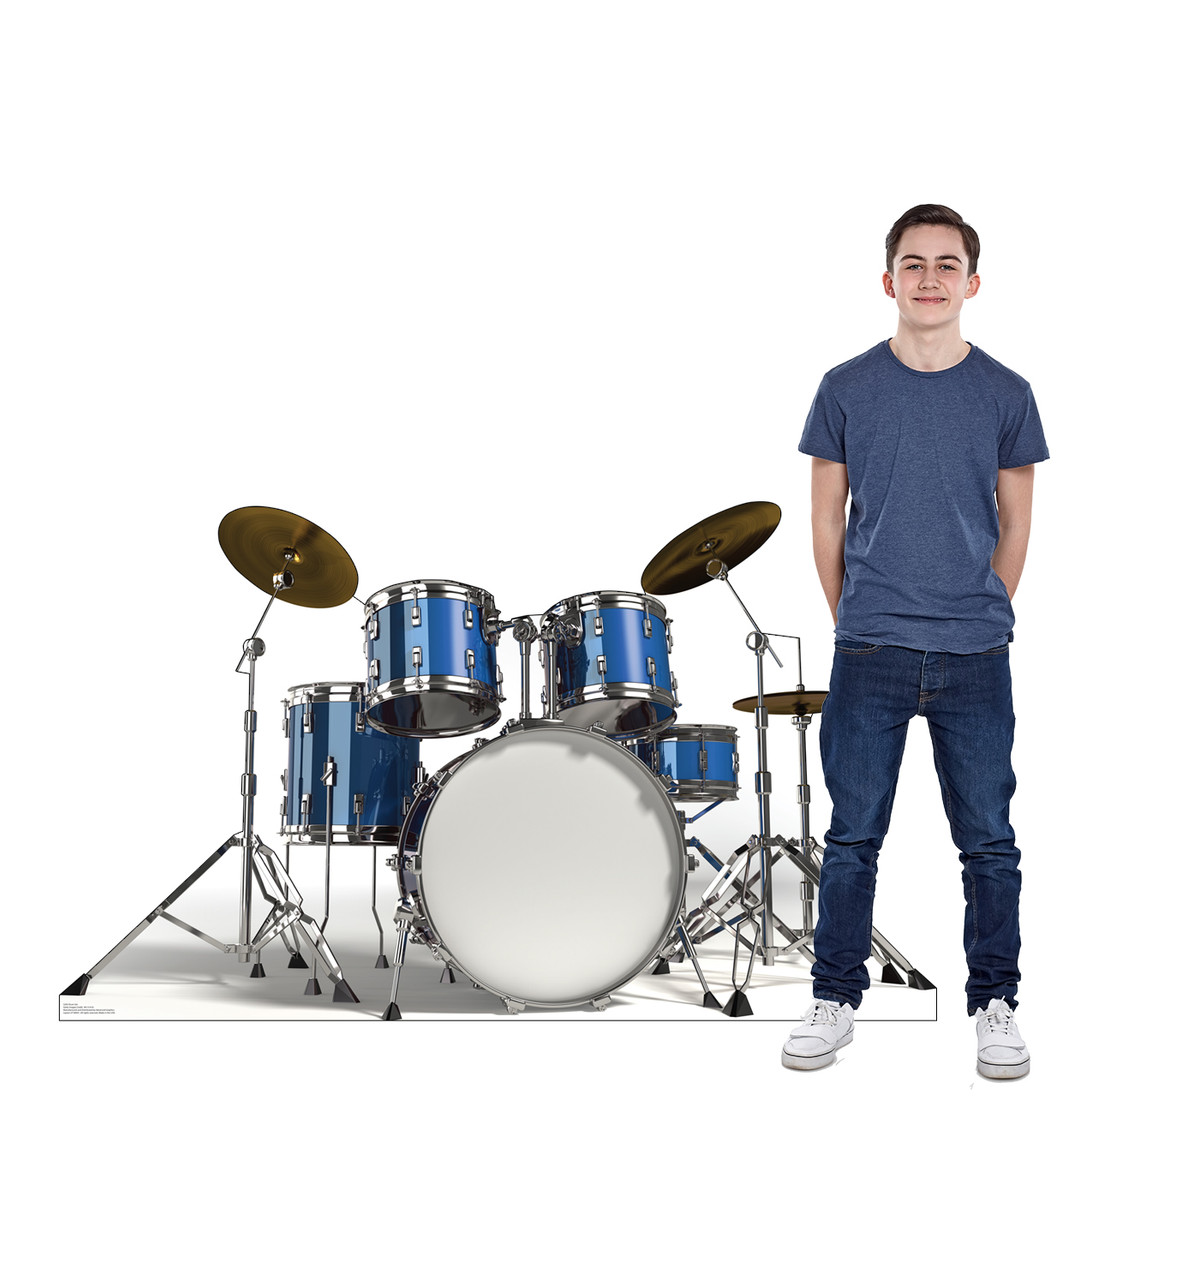 Life-size cardboard standee of a Drum Set with model.